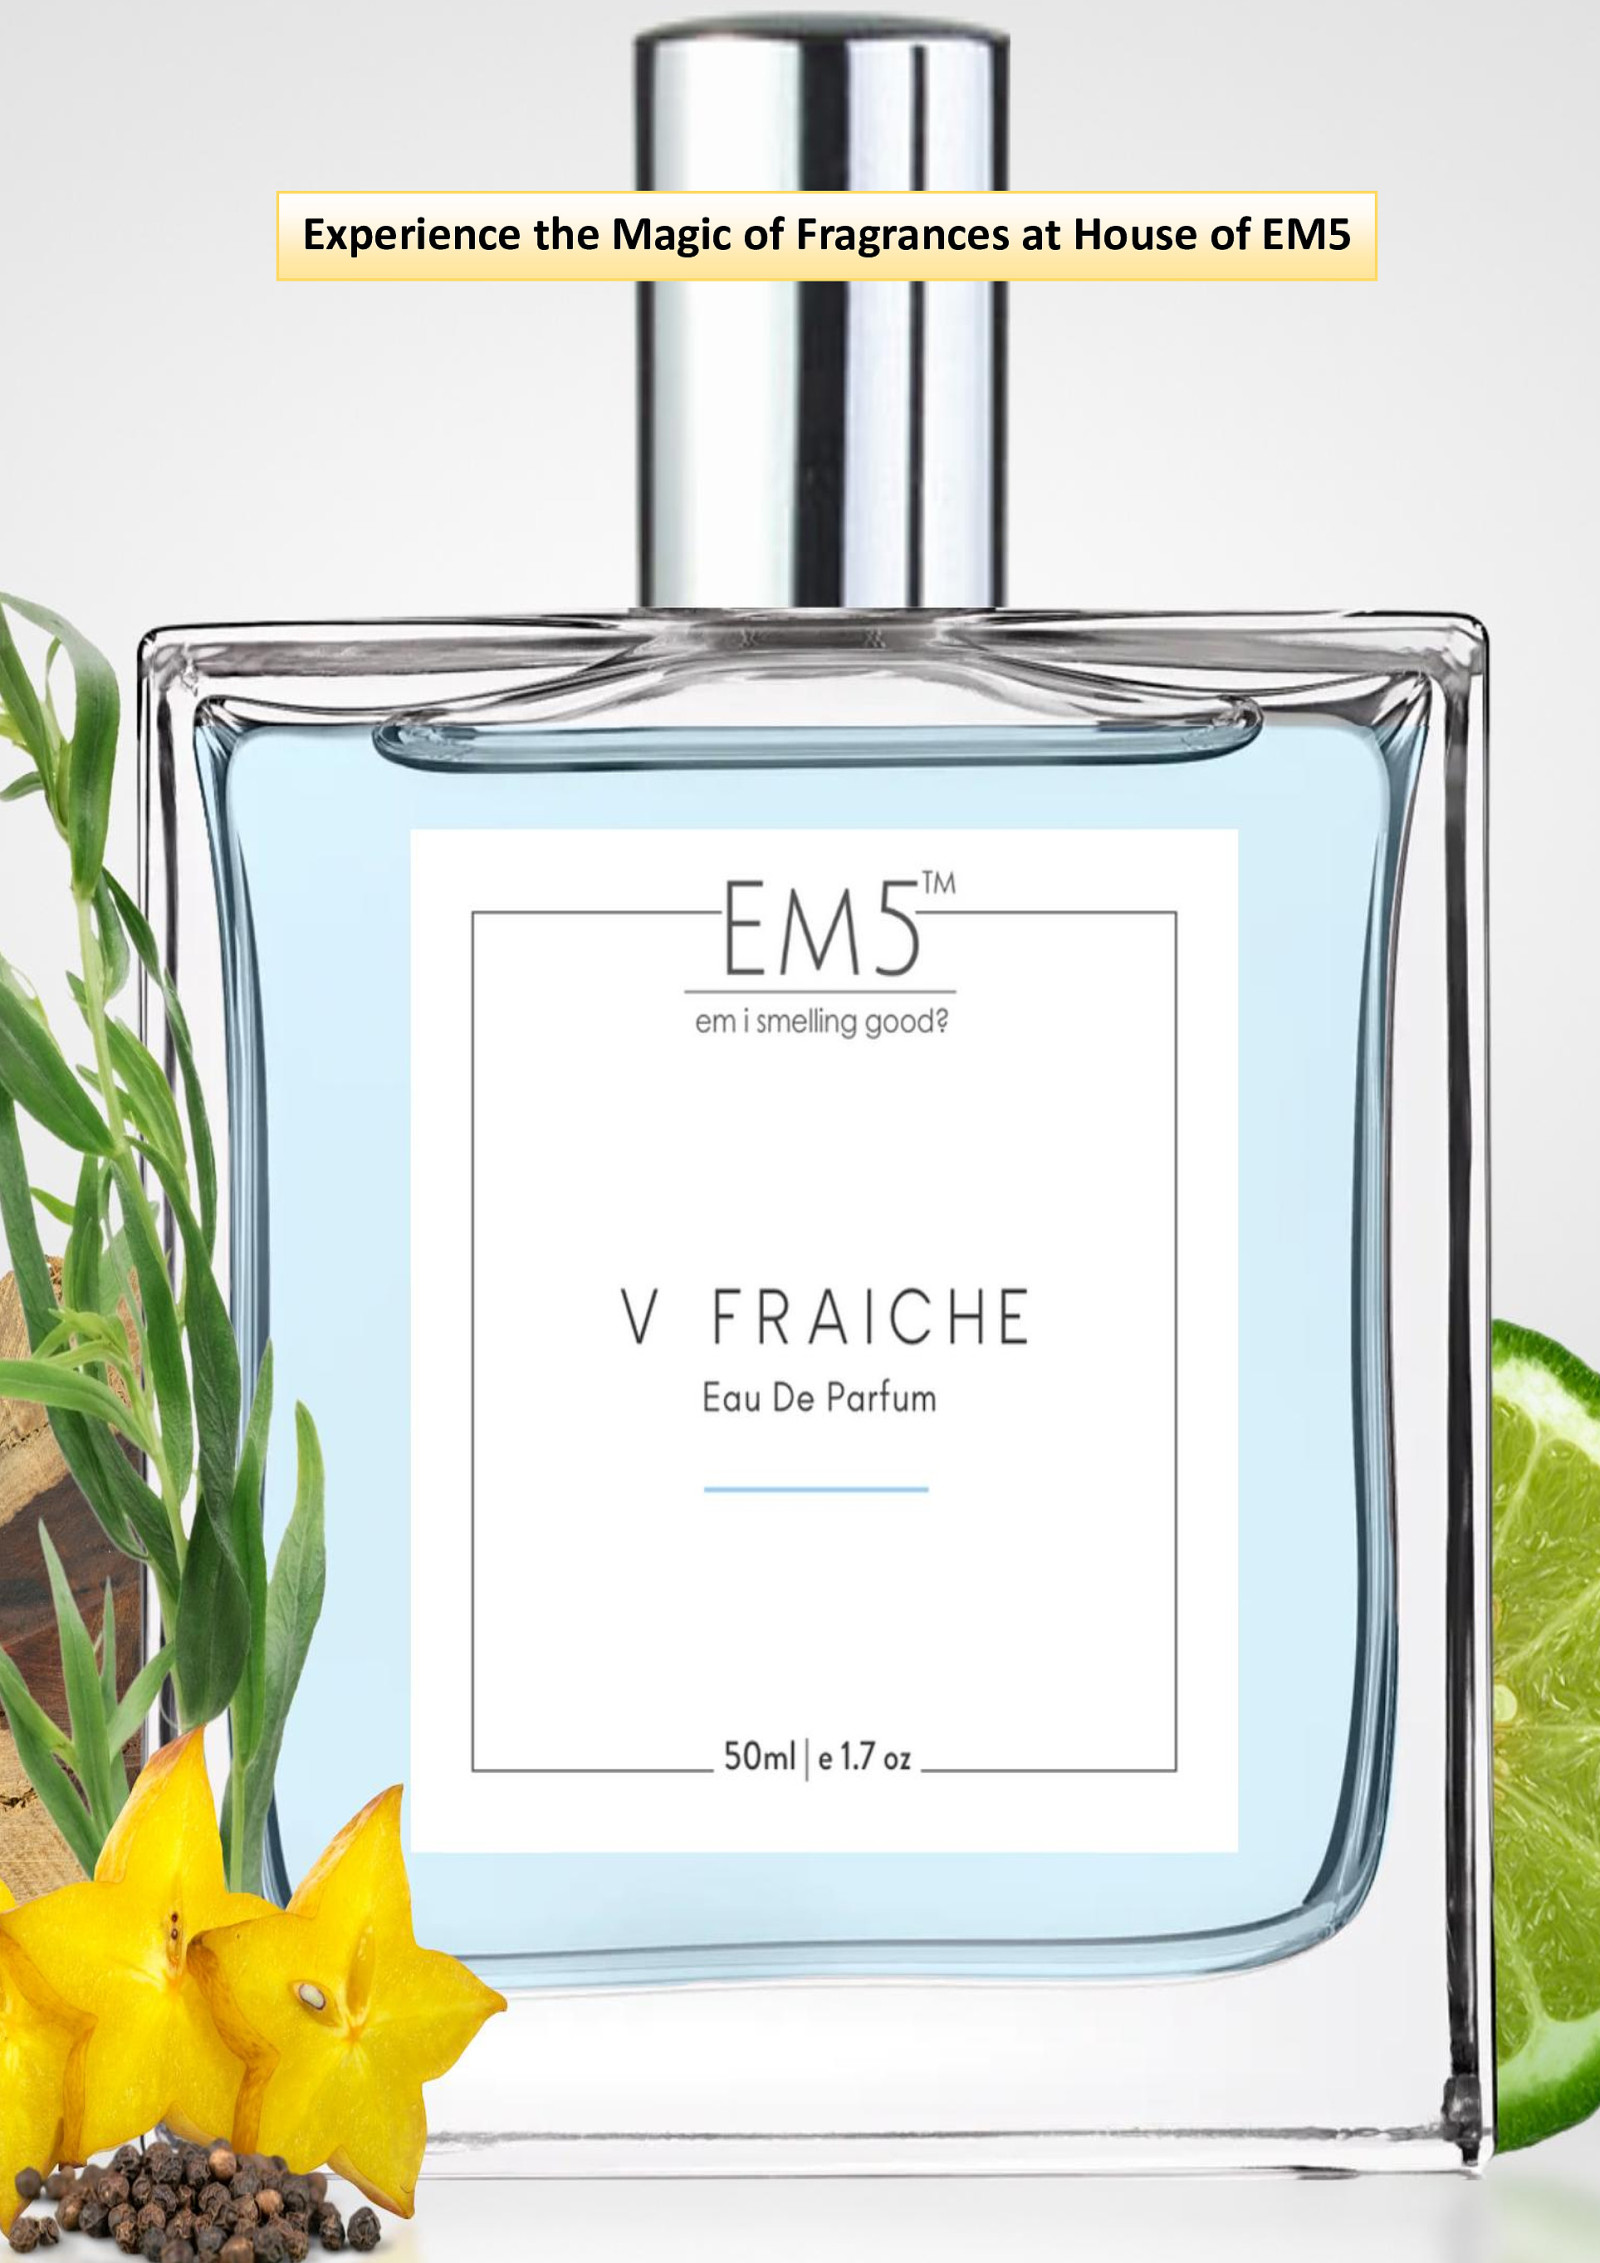 Experience the Magic of Fragrances at House of EM5